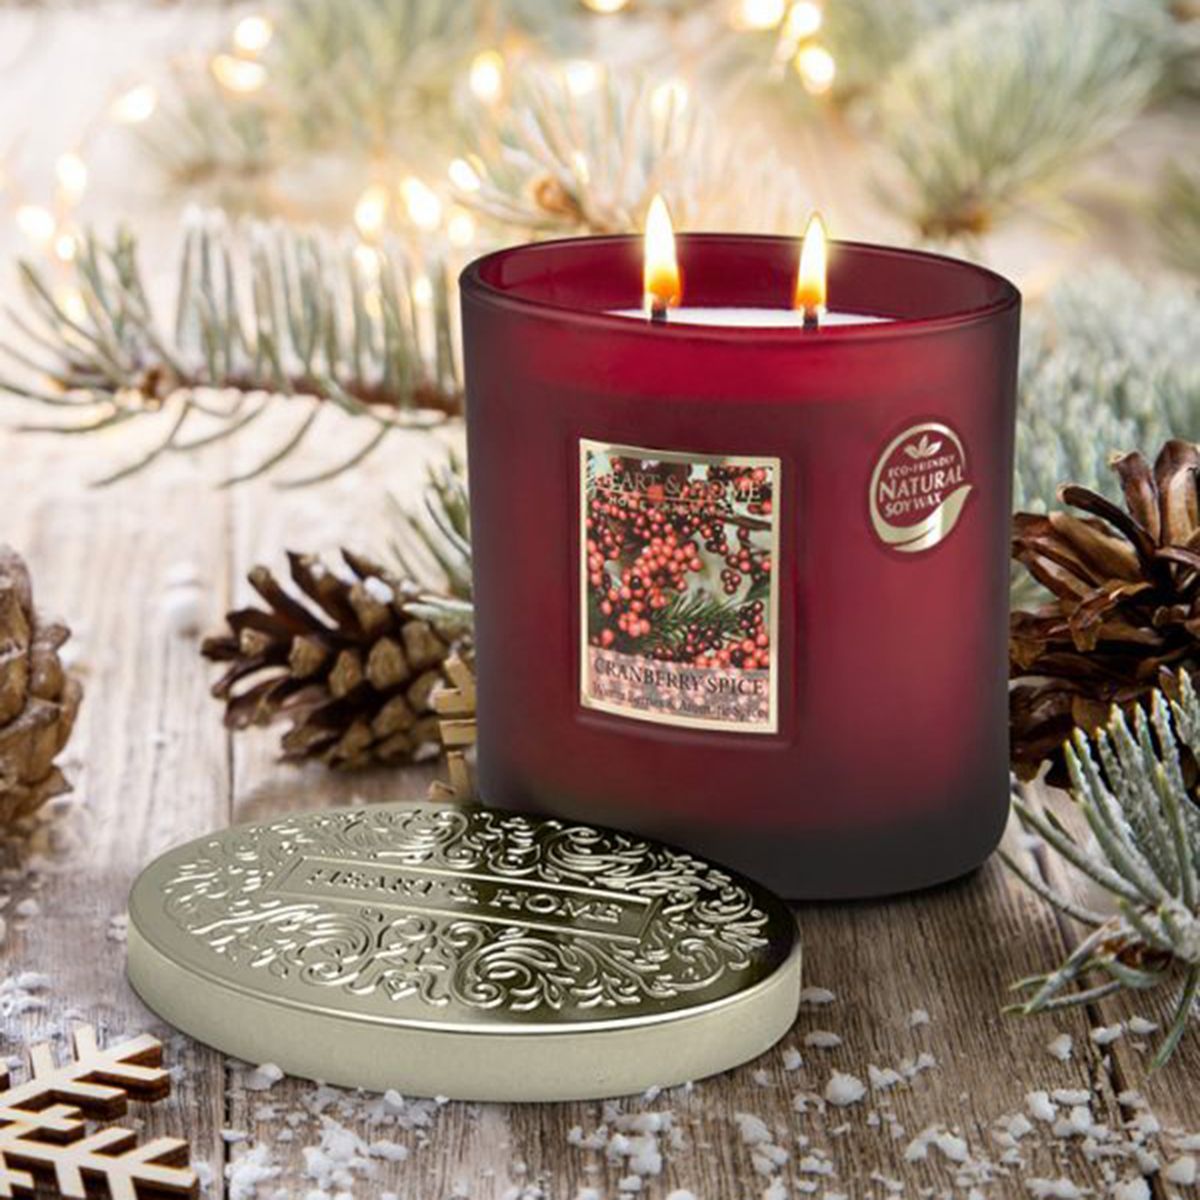 2 Wick Ellipse Candle Heart and Home - Cranberry Spice